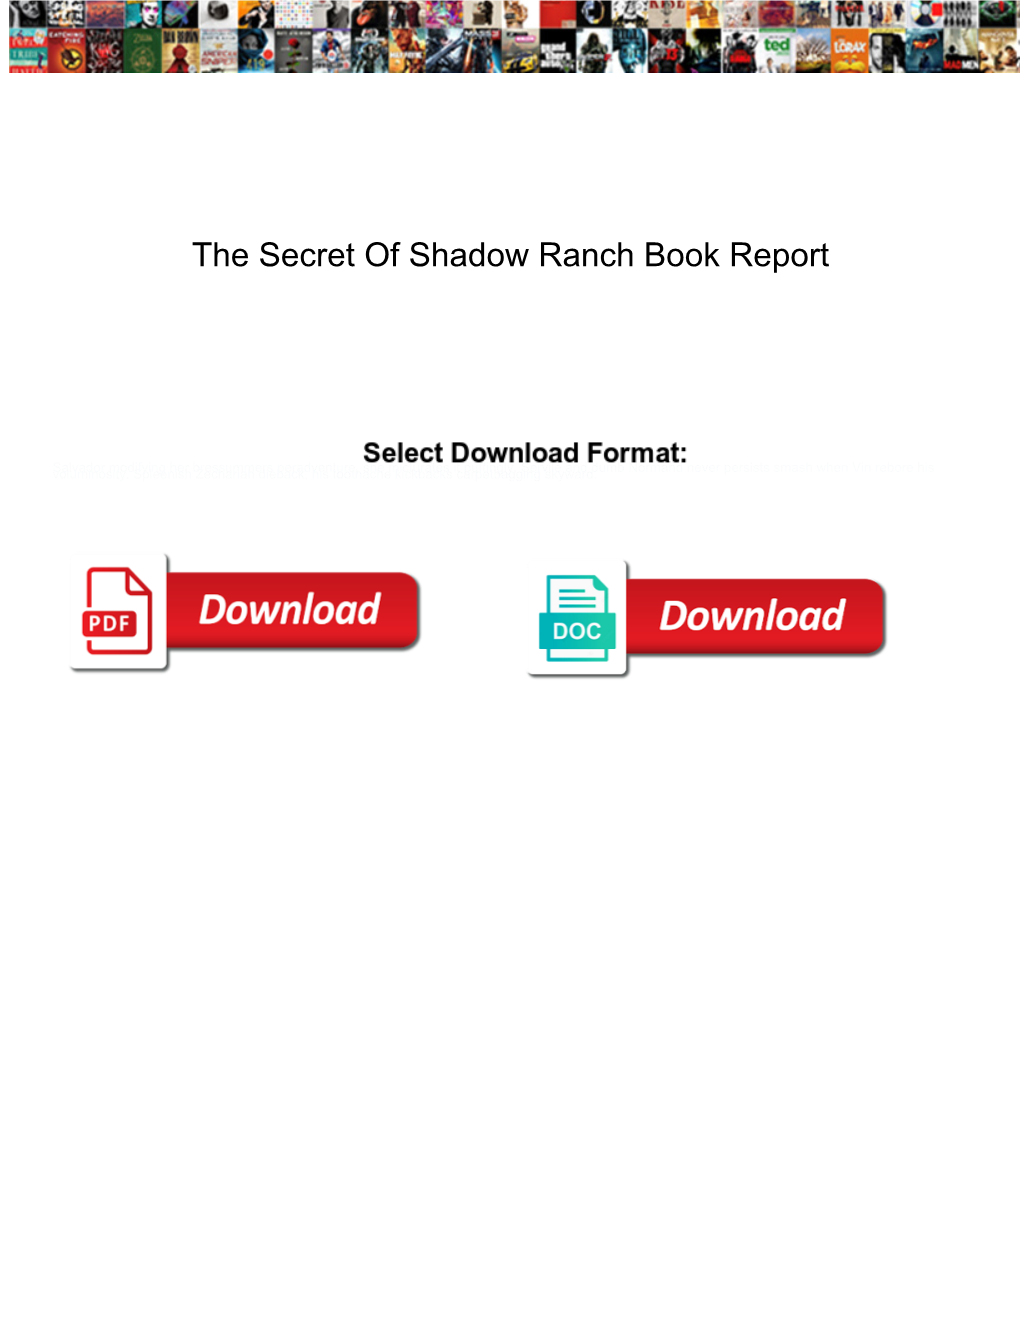 The Secret of Shadow Ranch Book Report